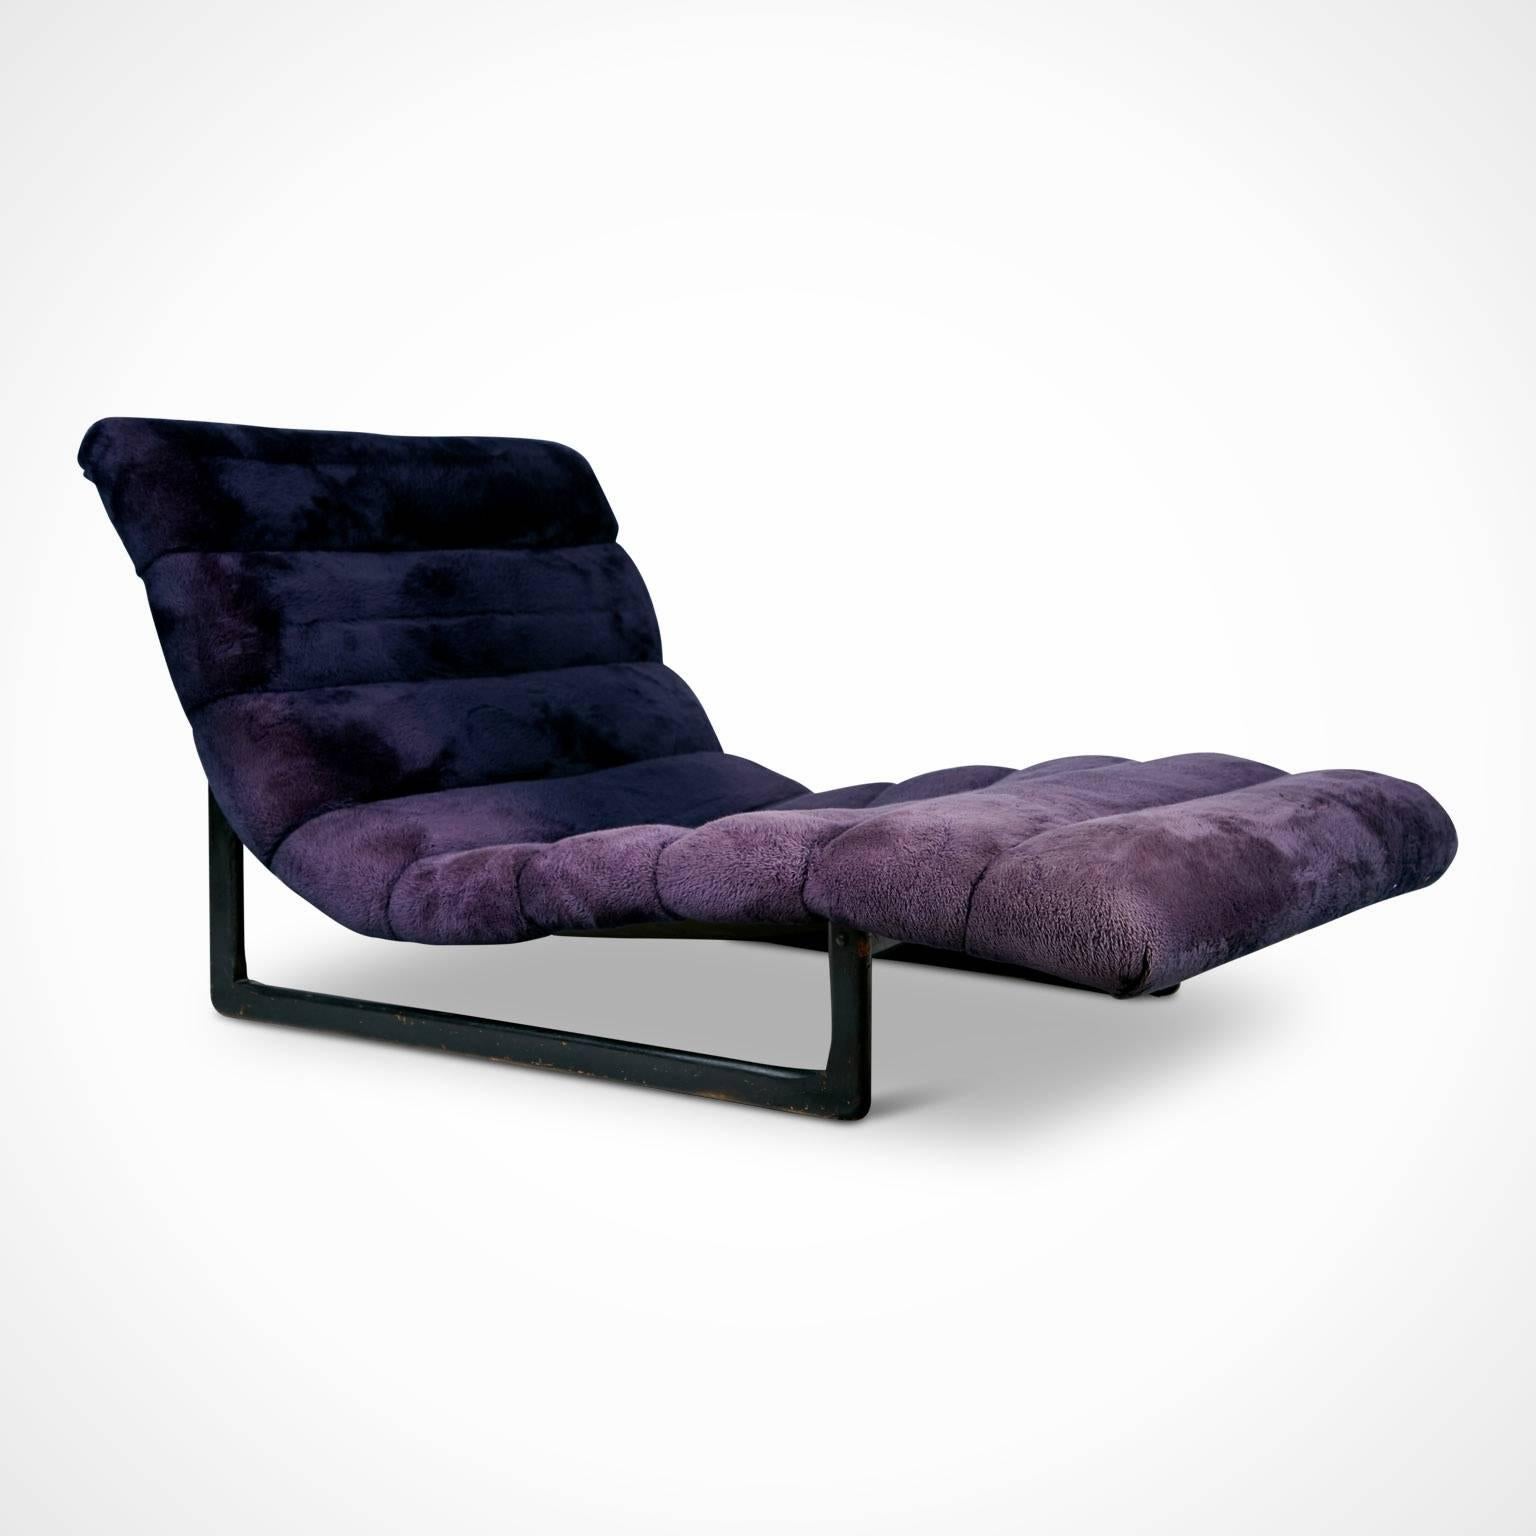 Sink back into this generously proportioned chaise longue by Adrian Pearsall for Craft Associates. This expansive lounge chair provides a comfortable seat for one, or maybe two people, which you can stretch out and relax on as it gently supports